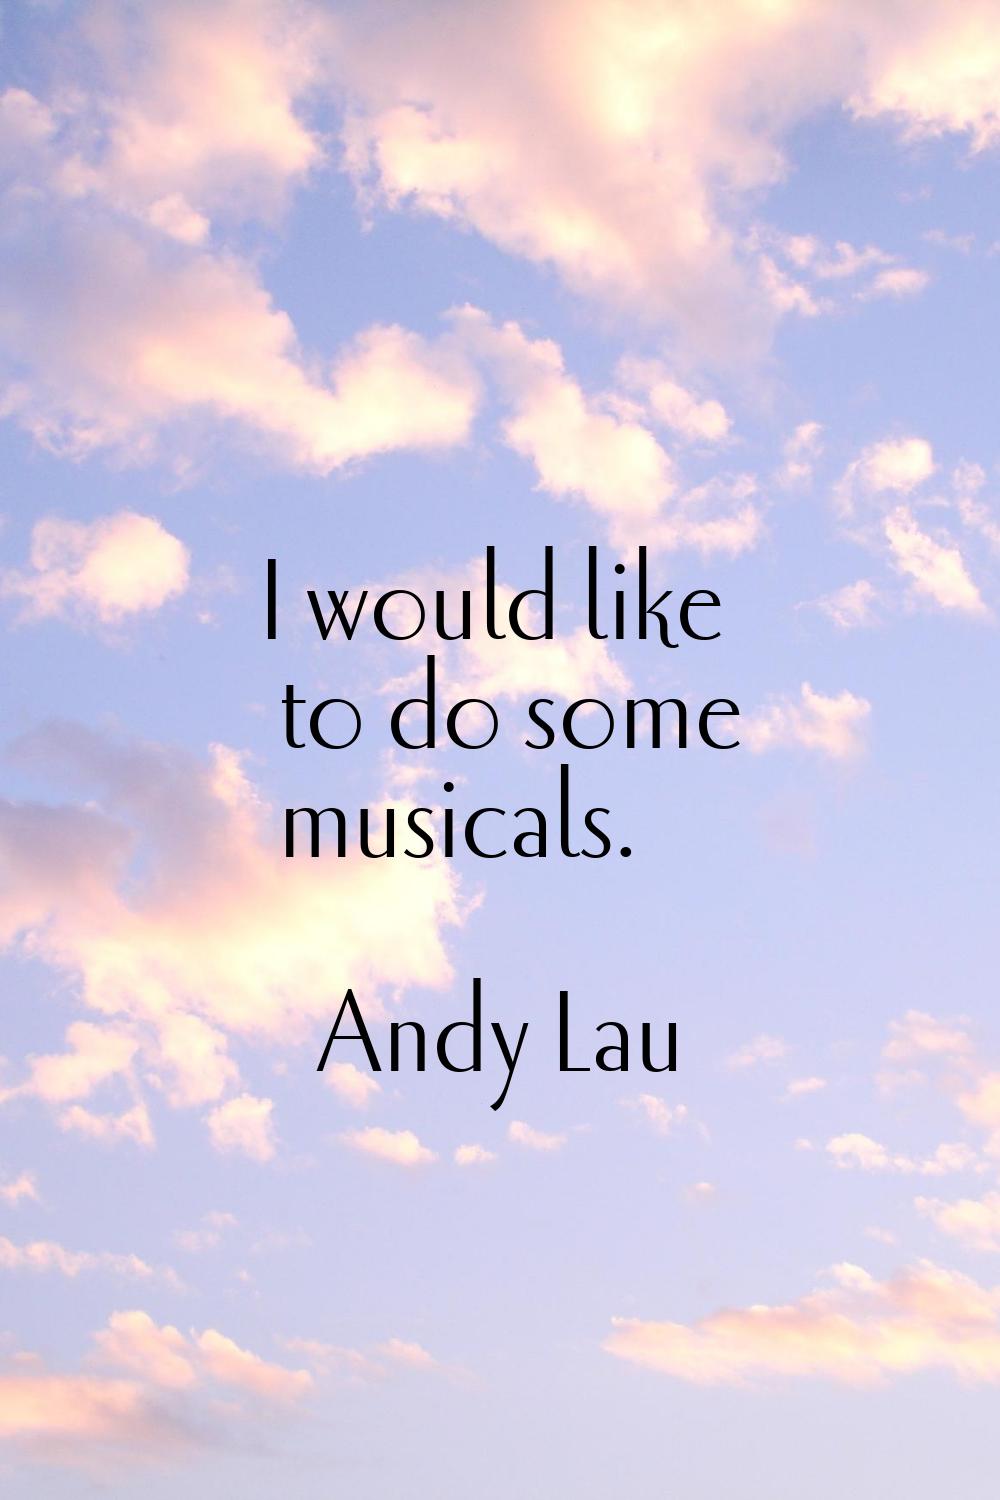 I would like to do some musicals.